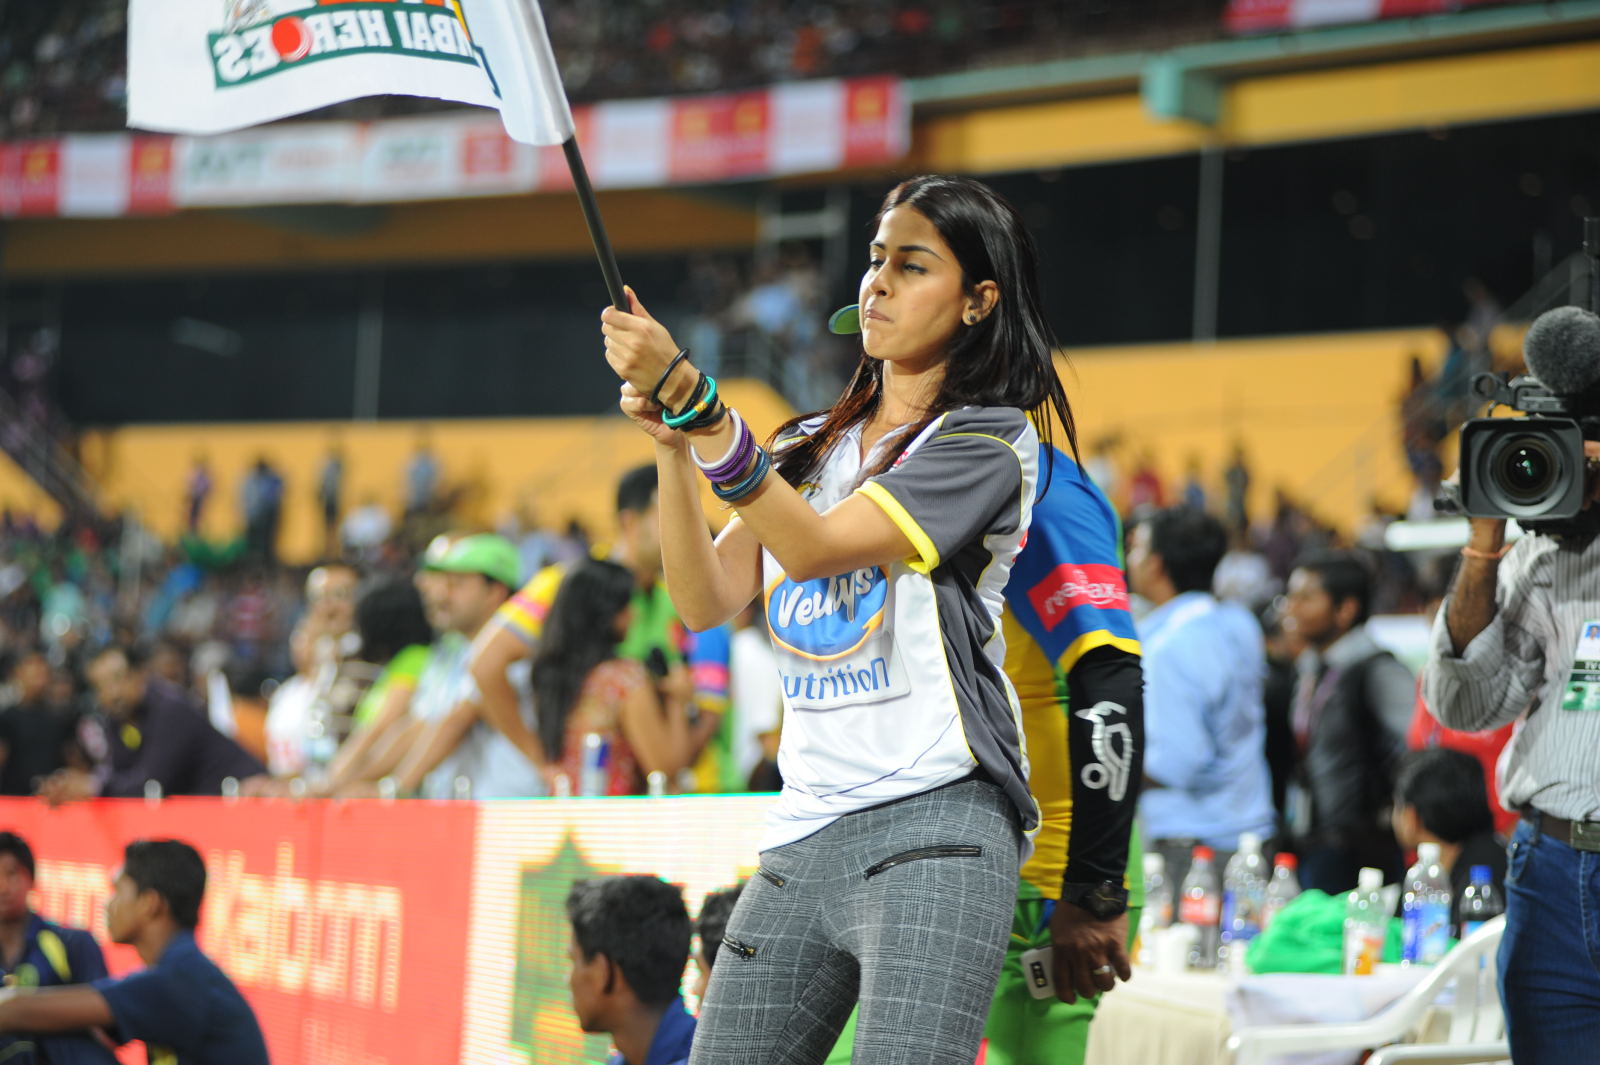 ... cheering at Ccl 2 Match Pics | Celebrities Wallpapers and Photos